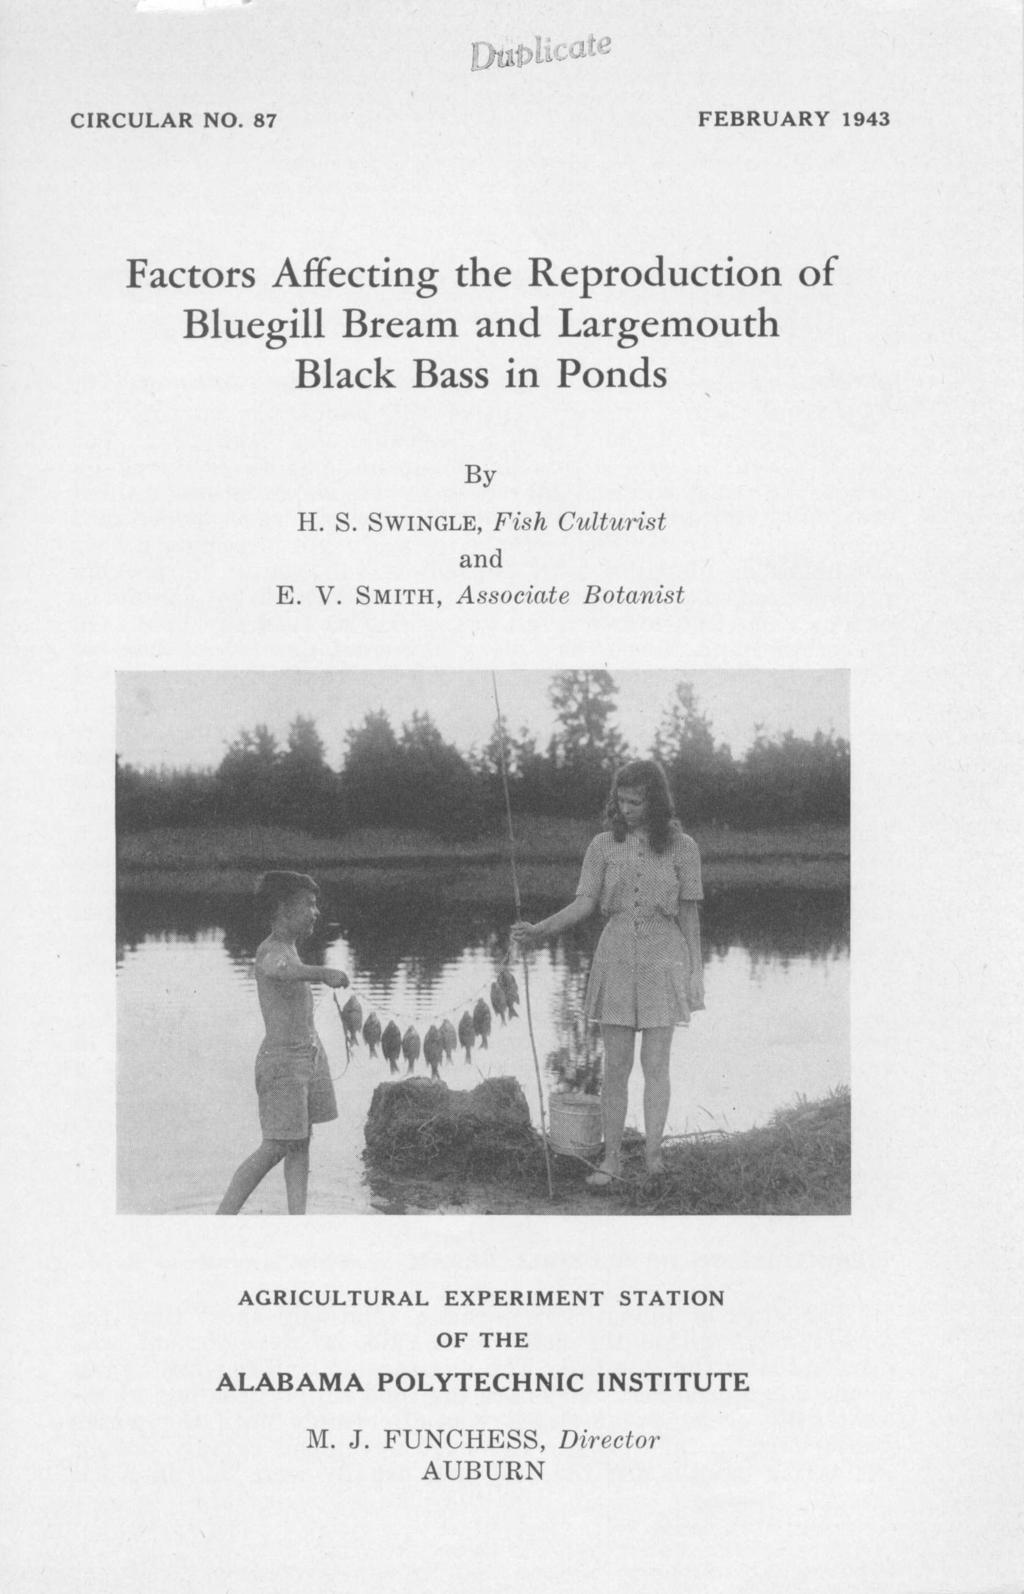 CIRCULAR NO. 87FERAY14 FEBRUARY 1943 Factors Affecting the Reproduction of Bluegill Bream and Largemouth Black Bass in Ponds H-. S.